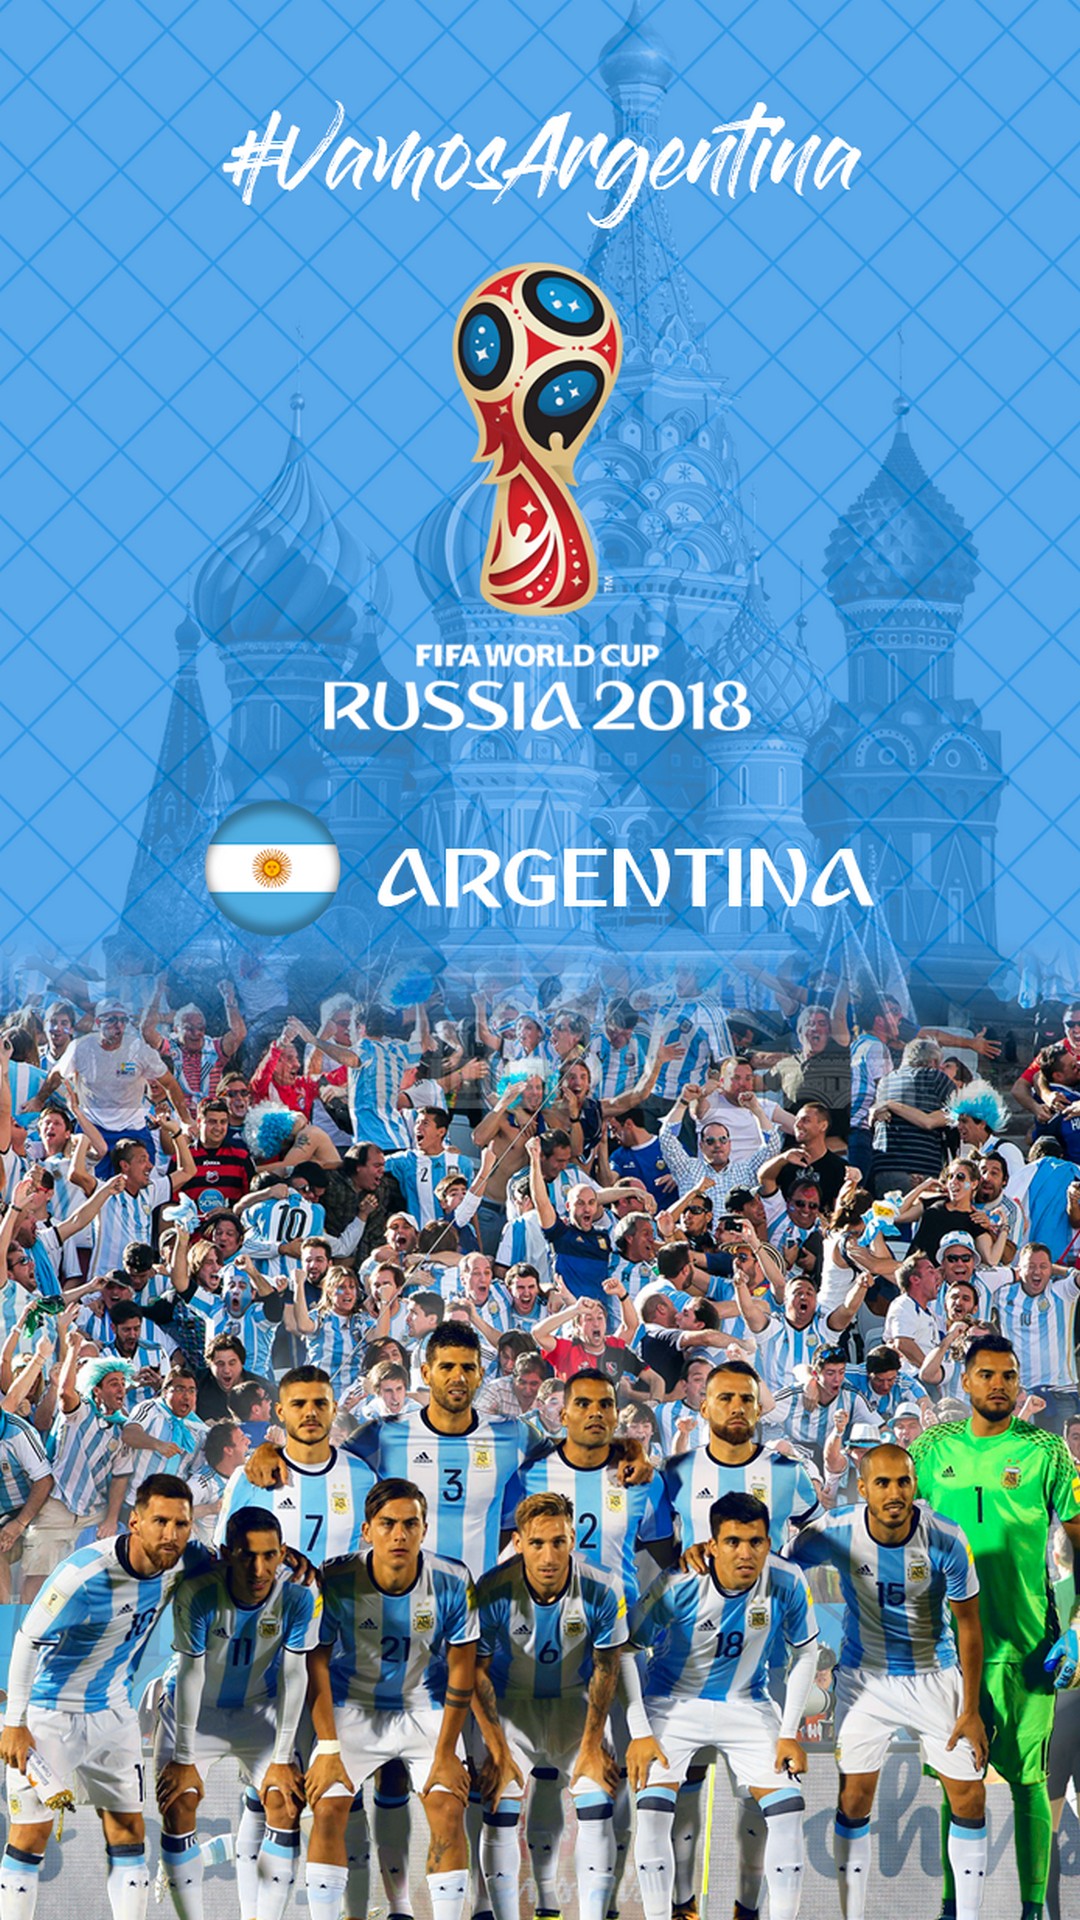 Argentina National Team HD Wallpaper For iPhone With Resolution 1080X1920 pixel. You can make this wallpaper for your Mac or Windows Desktop Background, iPhone, Android or Tablet and another Smartphone device for free